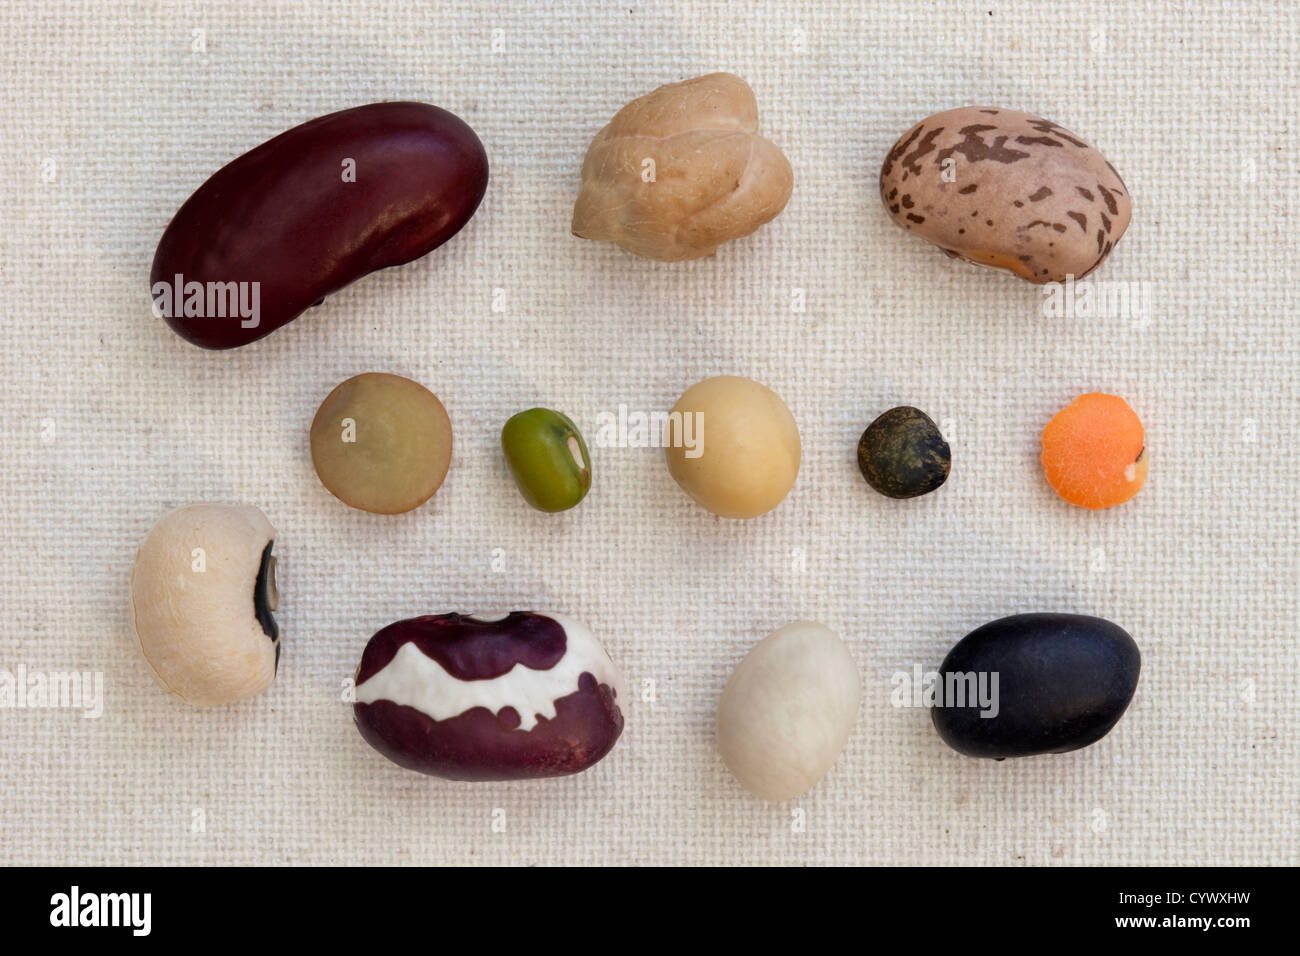 variety of beans and lentils on artist cotton canvas Stock Photo